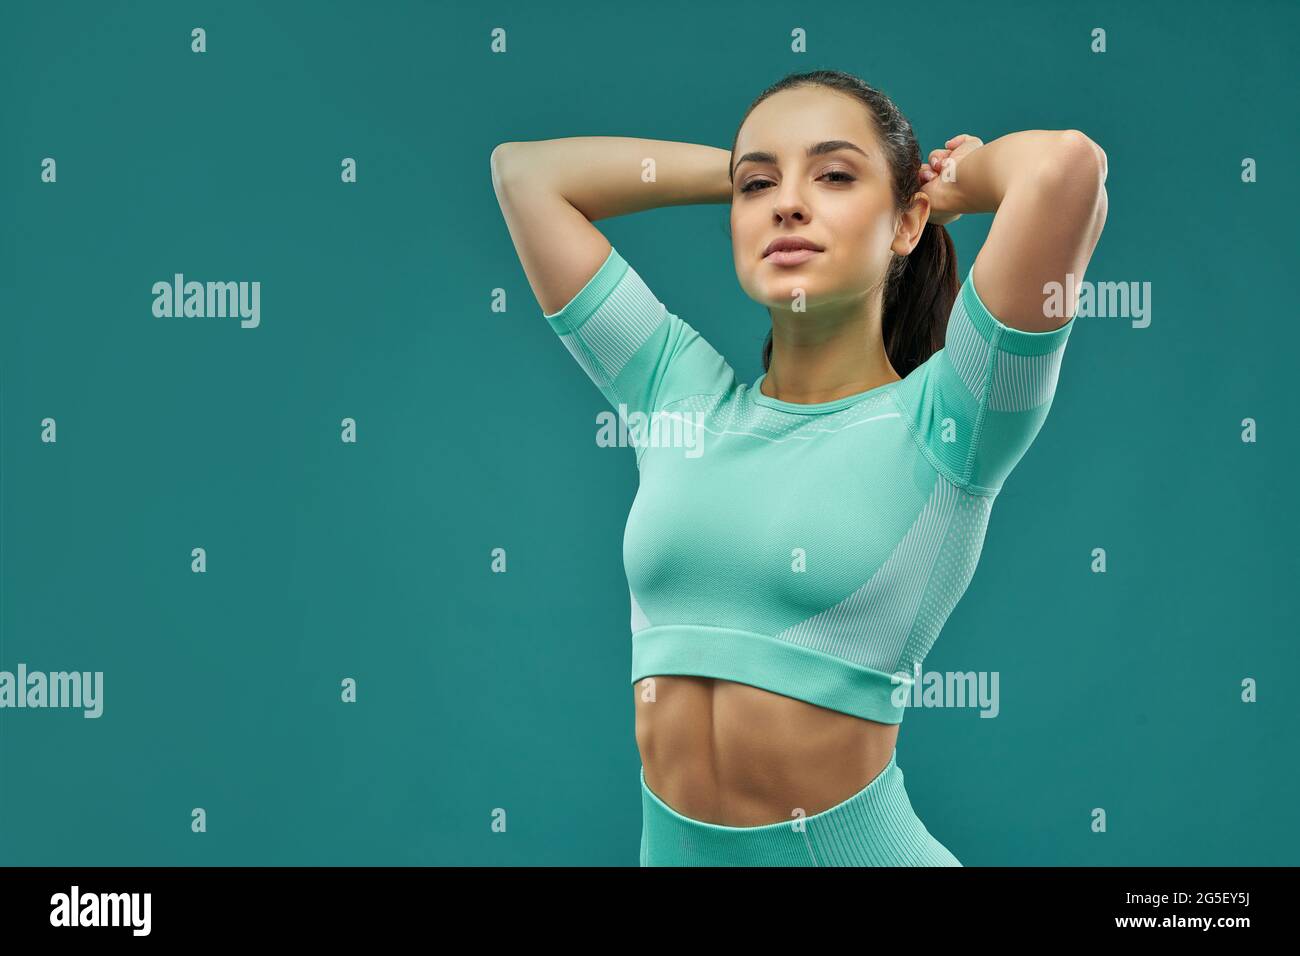 Attractive young woman in sportswear fixing her hair Stock Photo